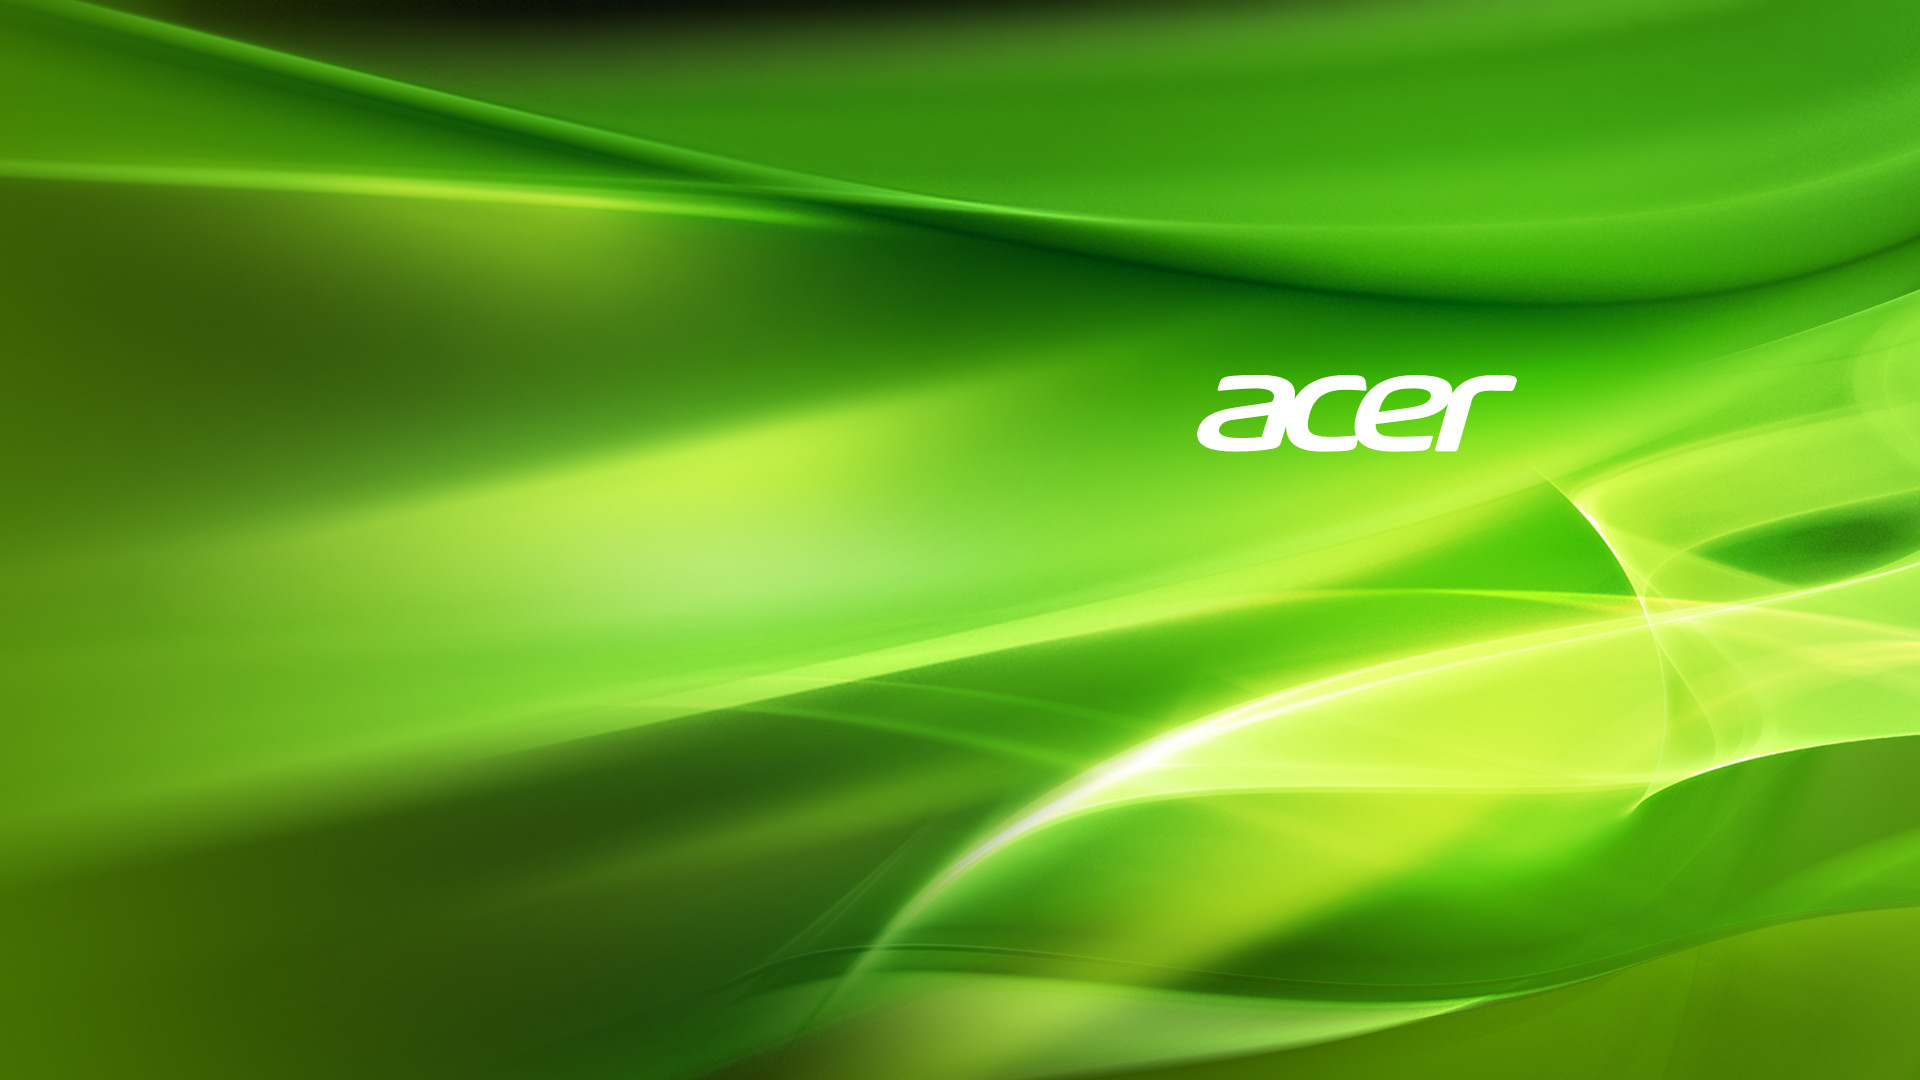 Acer Wallpaper Windows 7 (65+ pictures)